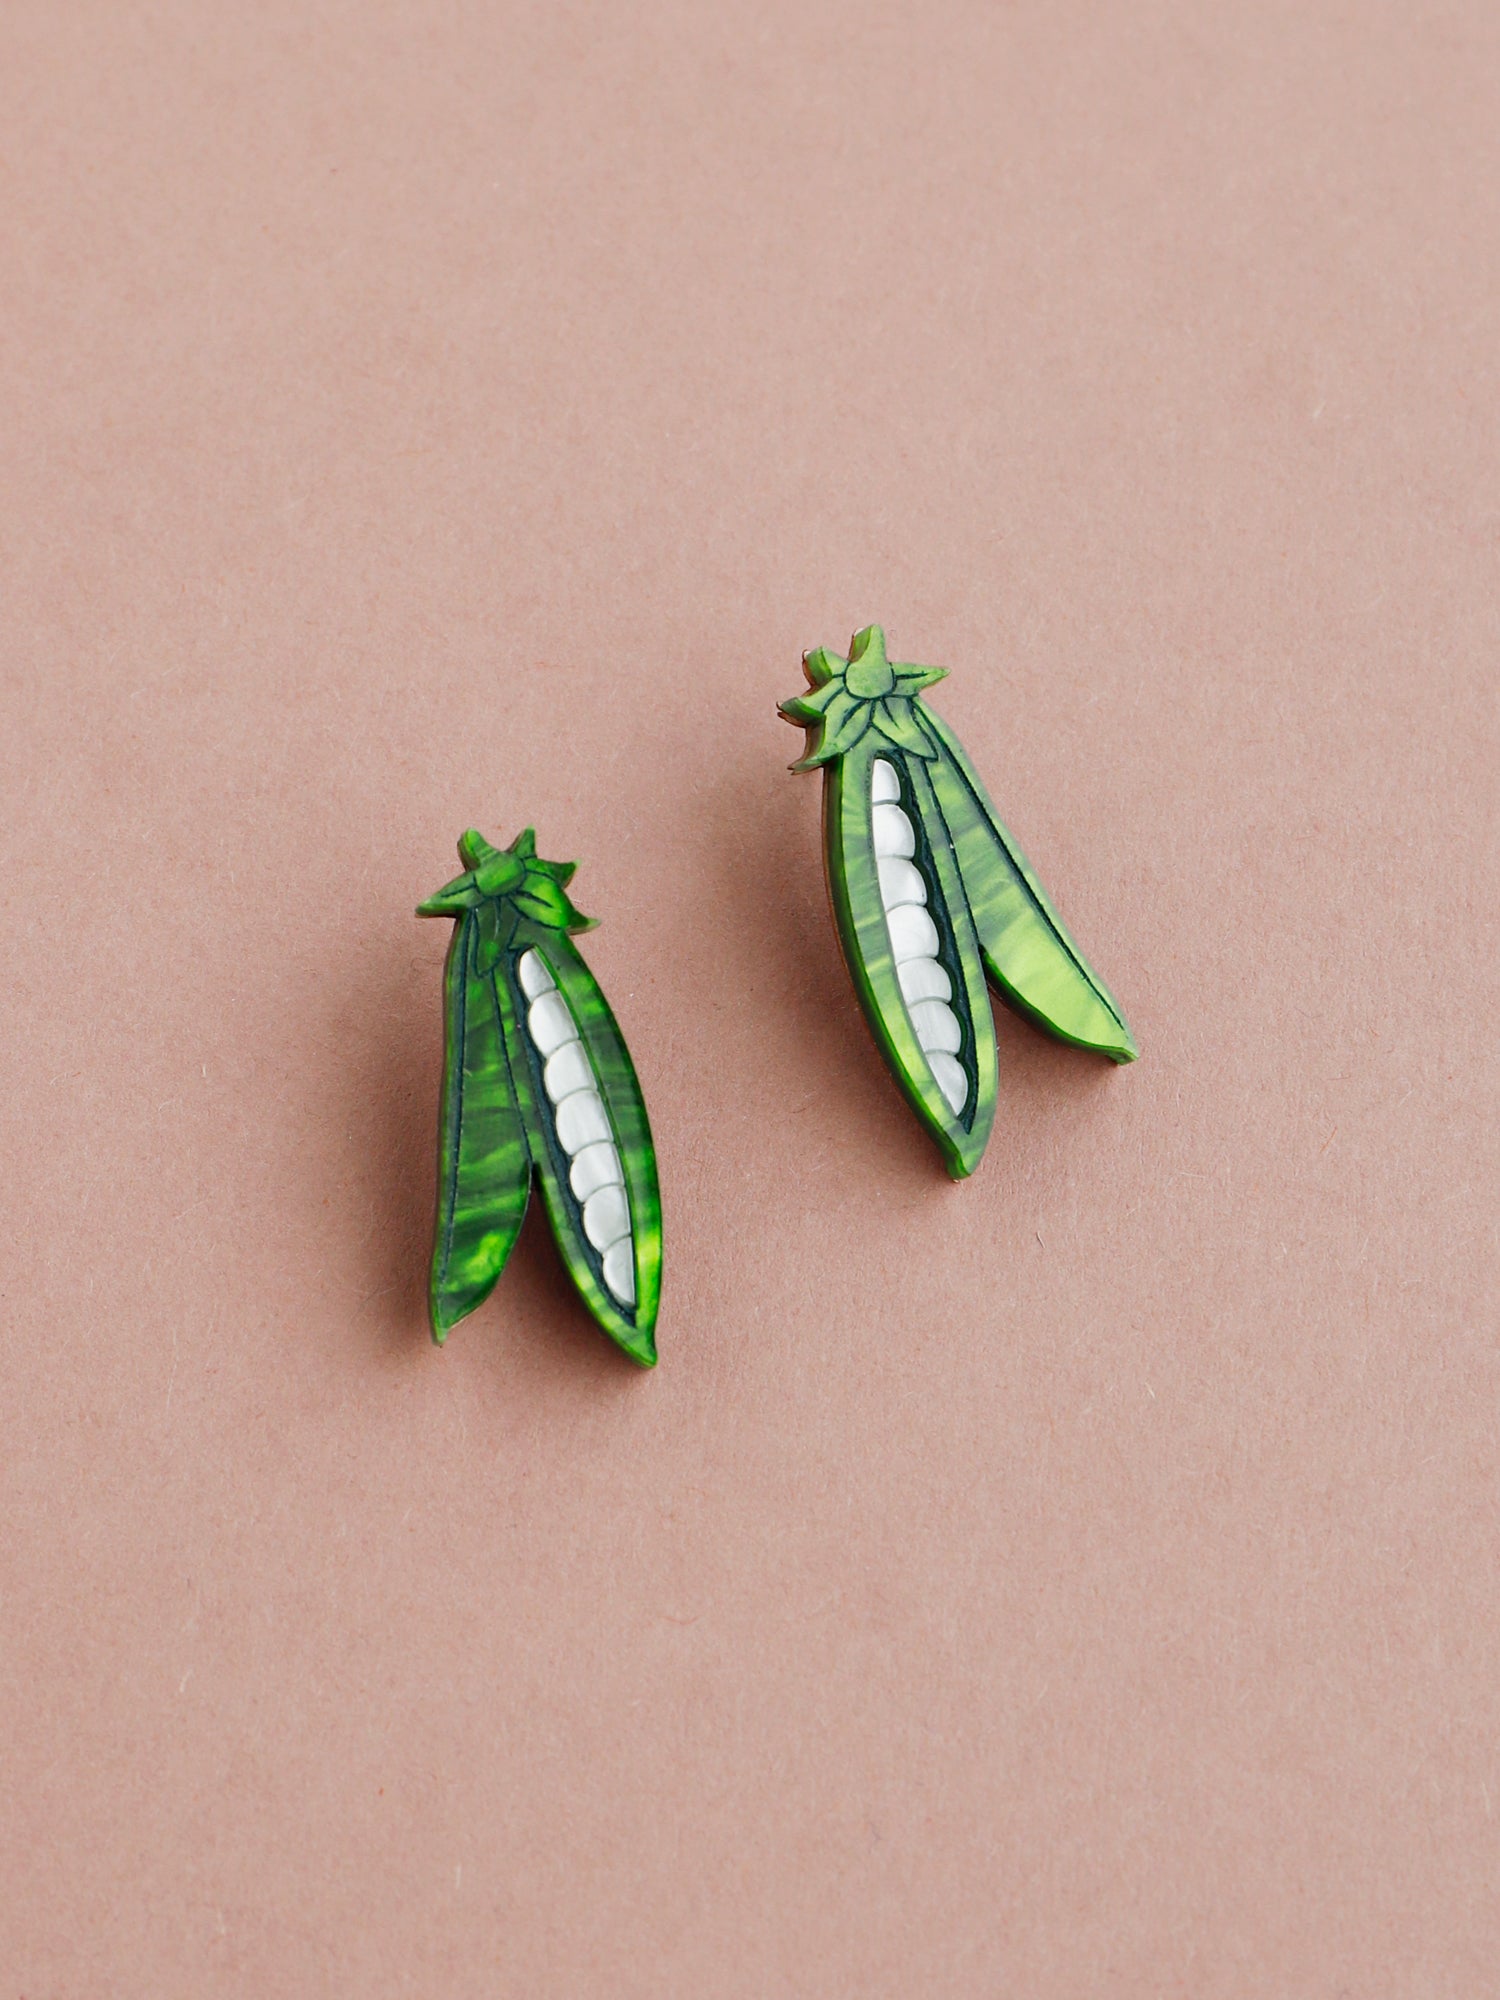 These playful peas in a pod stud earrings are made from marbled acrylic, wood with sterling silver posts. Handmade in London by Wolf & Moon.